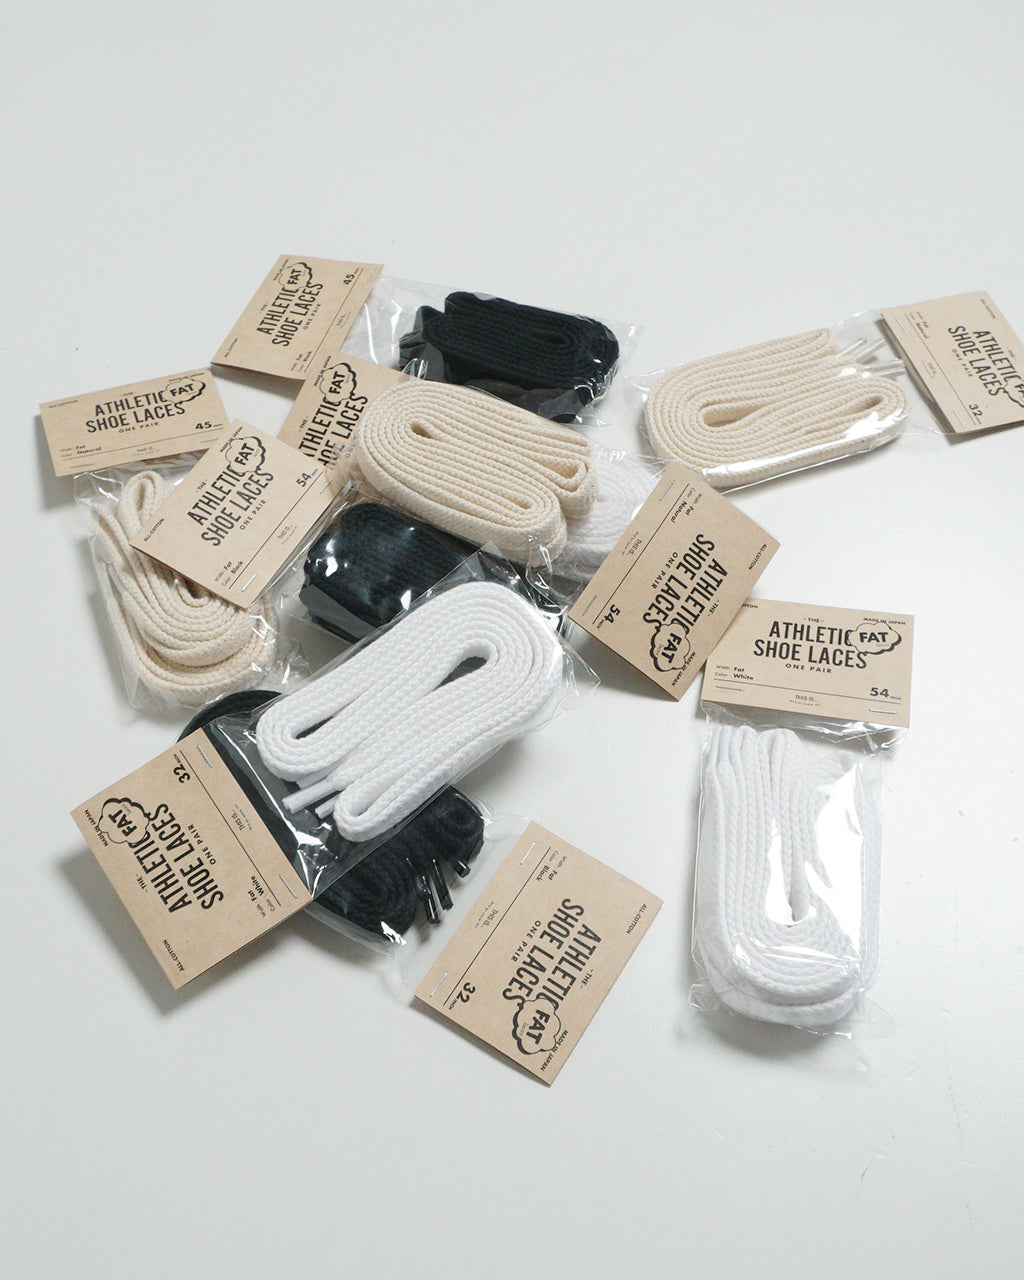 THIS IS… ディス イズ… アスレチック コットン シュー レース Athletic Cotton Shoe Laces -Fat- 靴紐 2本入り 32471011 【クーポン対象外】